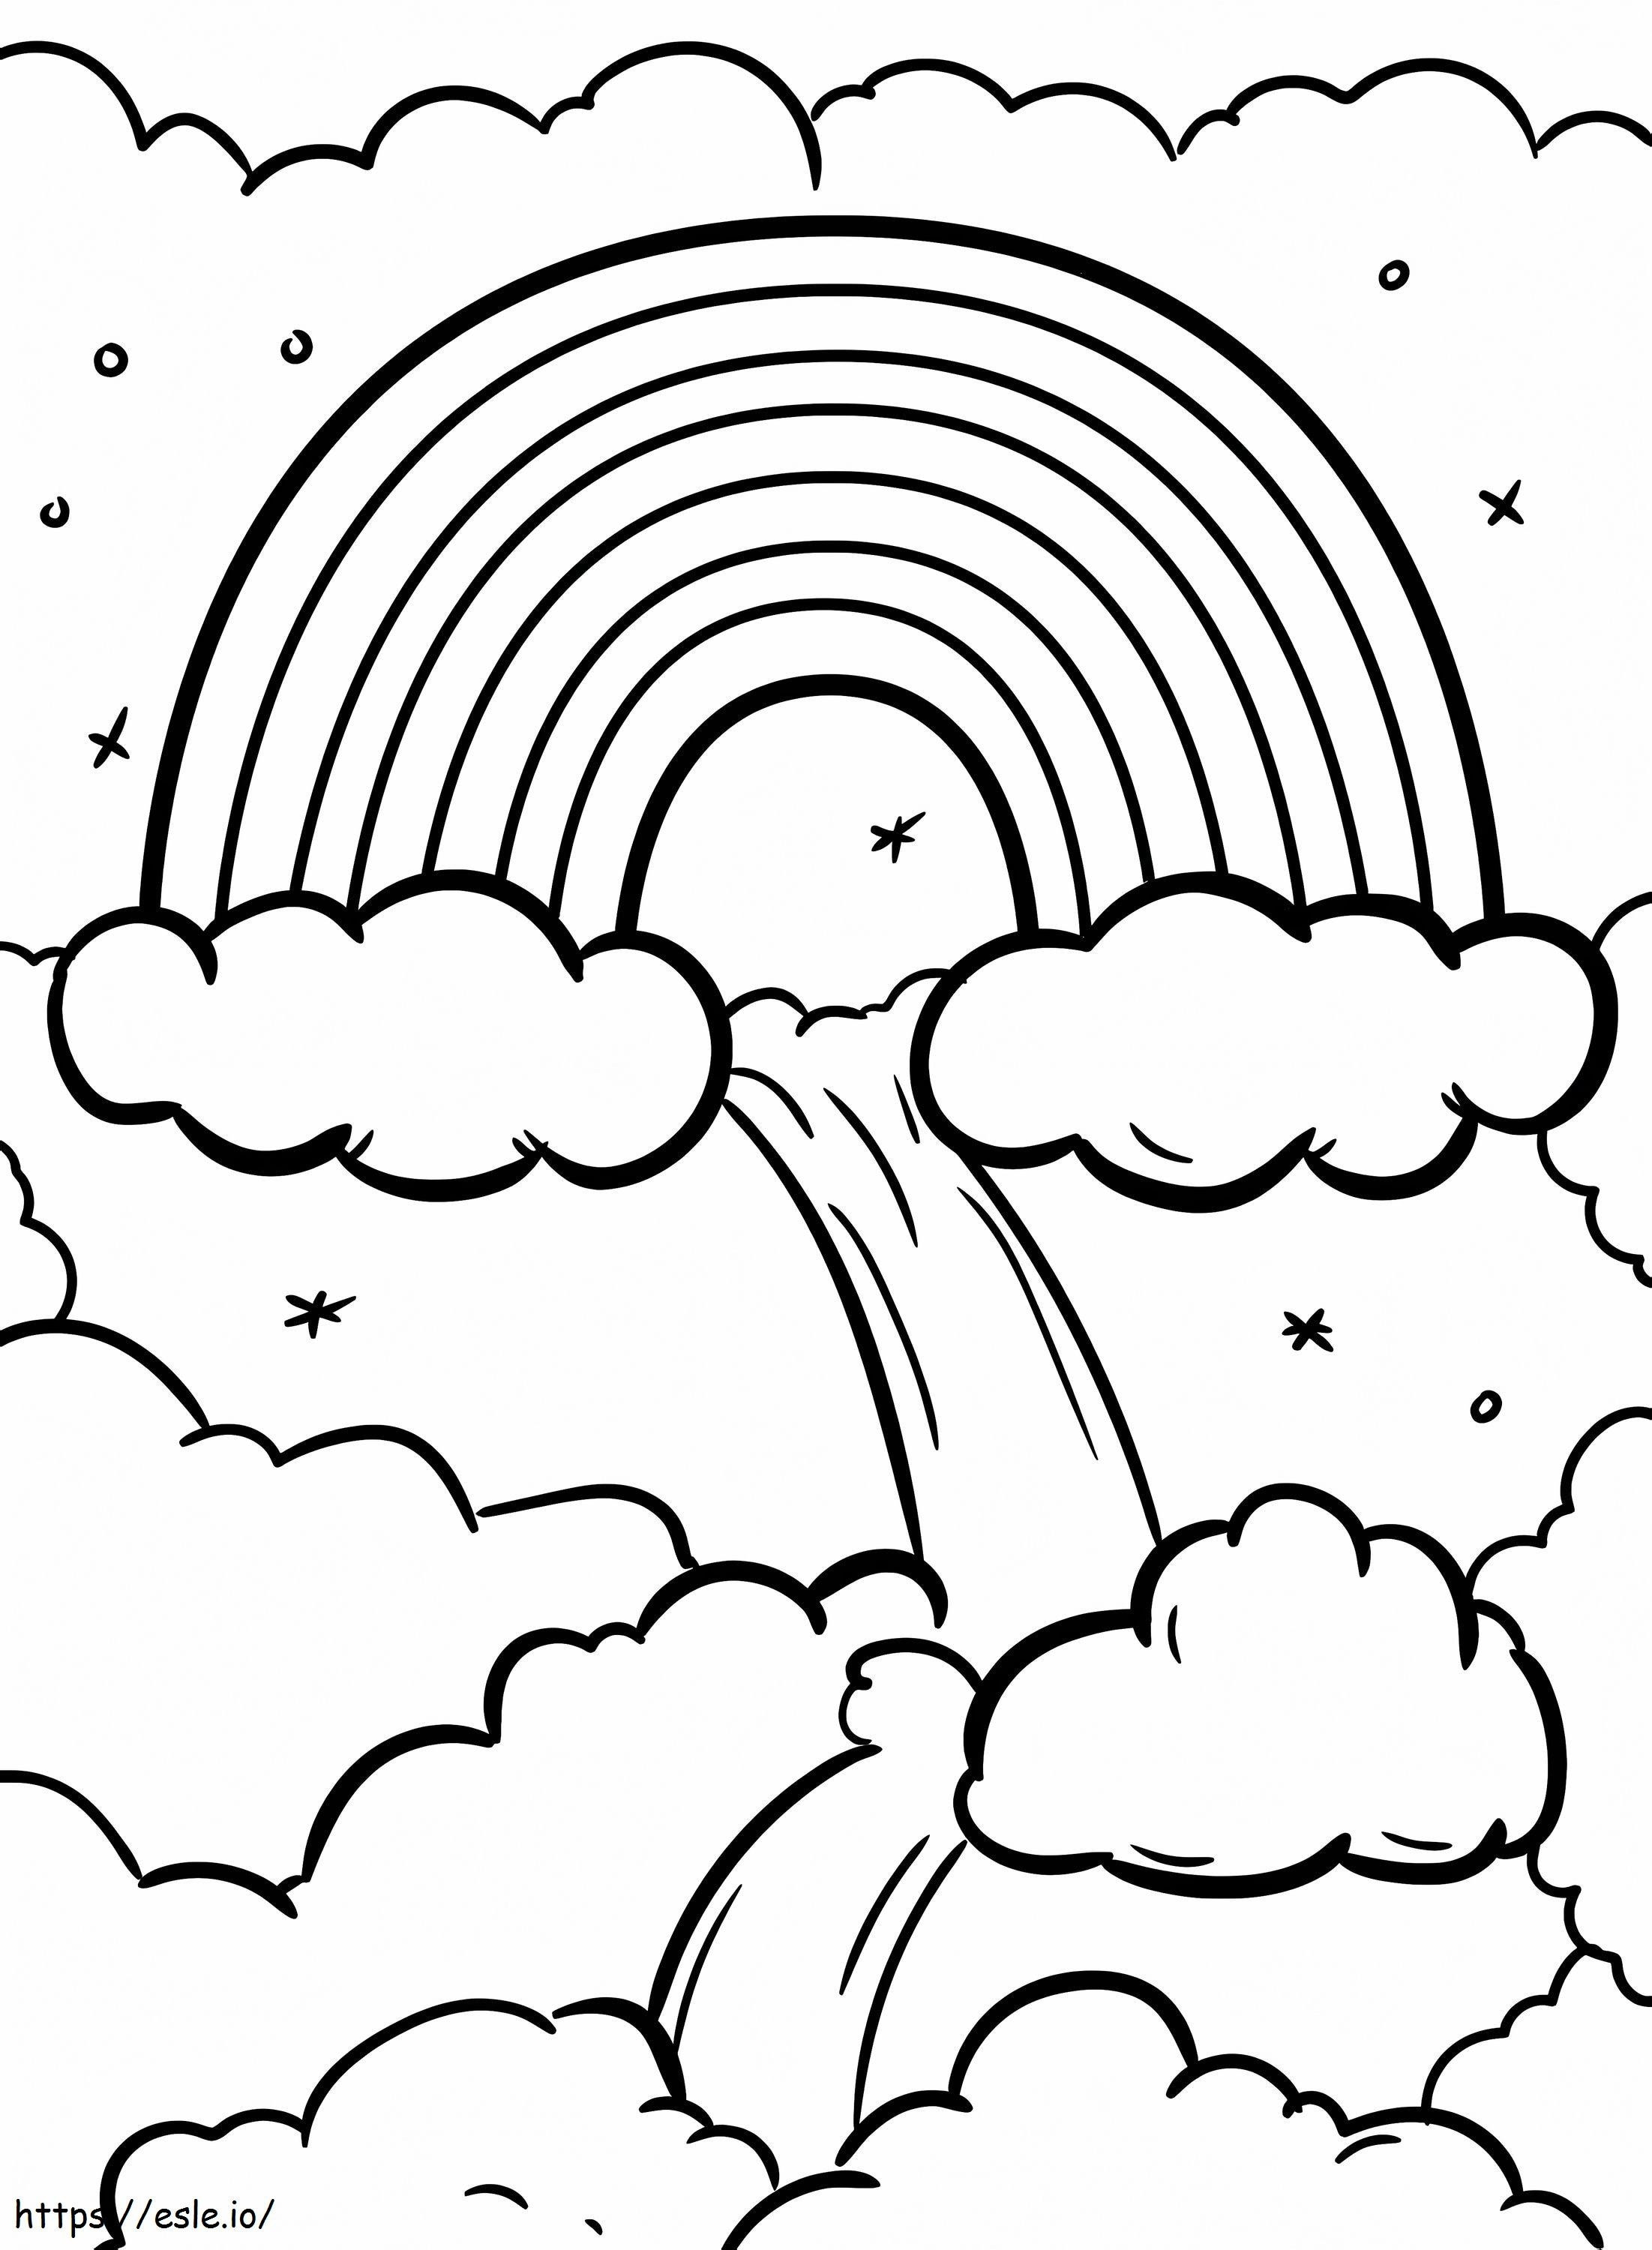 Rainbow Waterfall coloring page